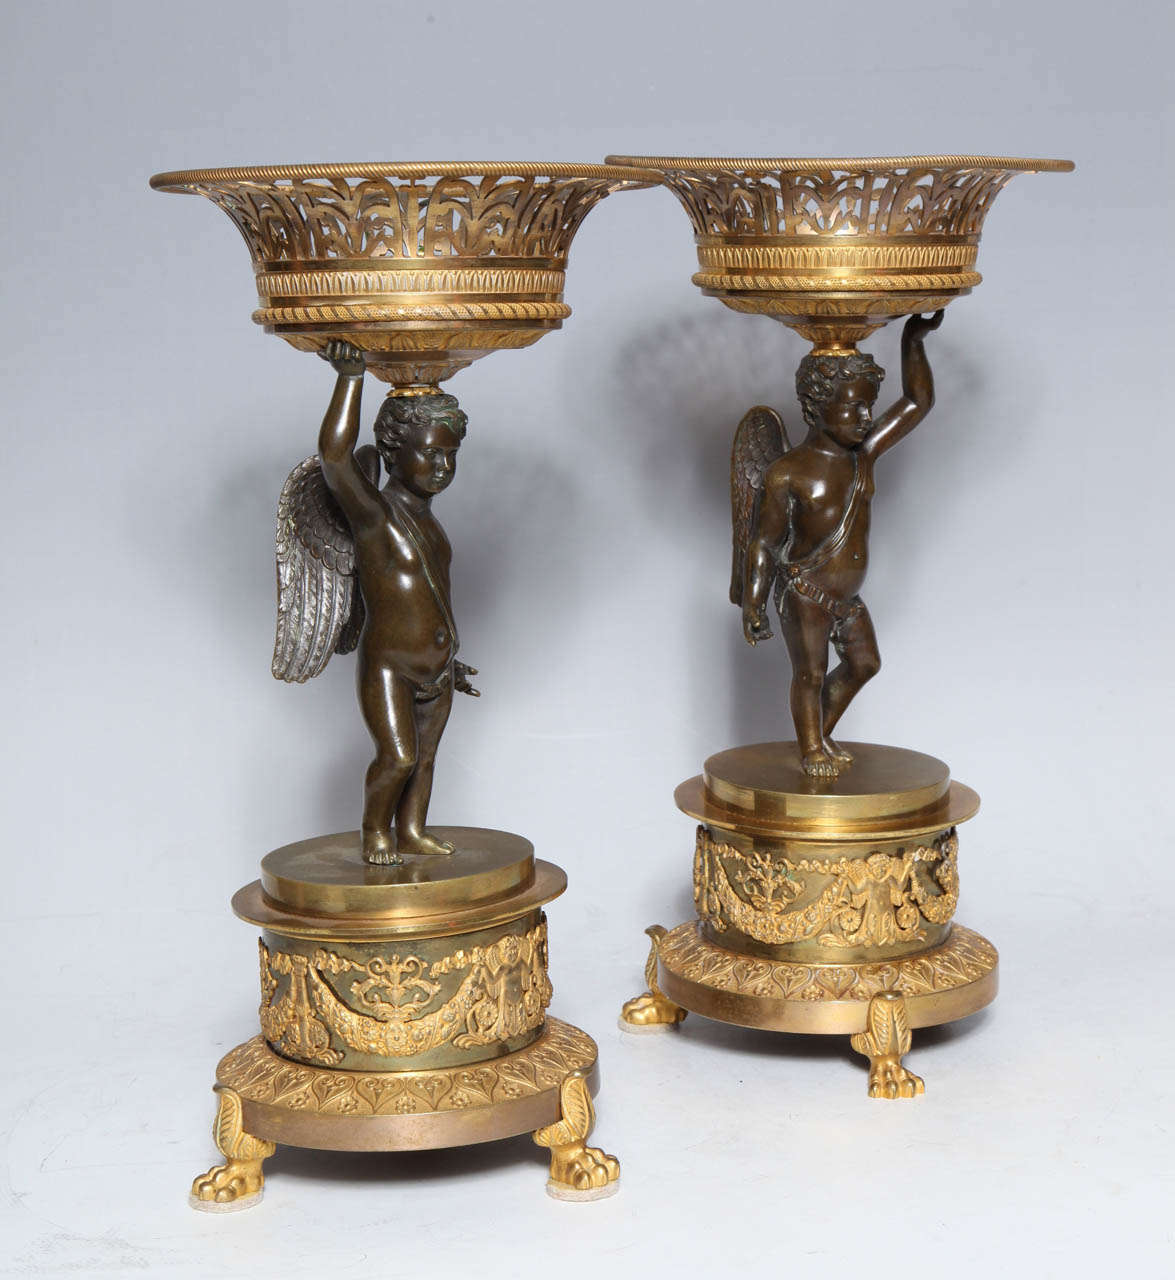 An Antique Pair of French Empire Period, Patinated & Dore Bronze Figural Centerpieces with Cupids. Each cupid holding a reticulated circular bowl in dore bronze in one hand, standing on a circular plinth with garlands and Lions paw feet in dore